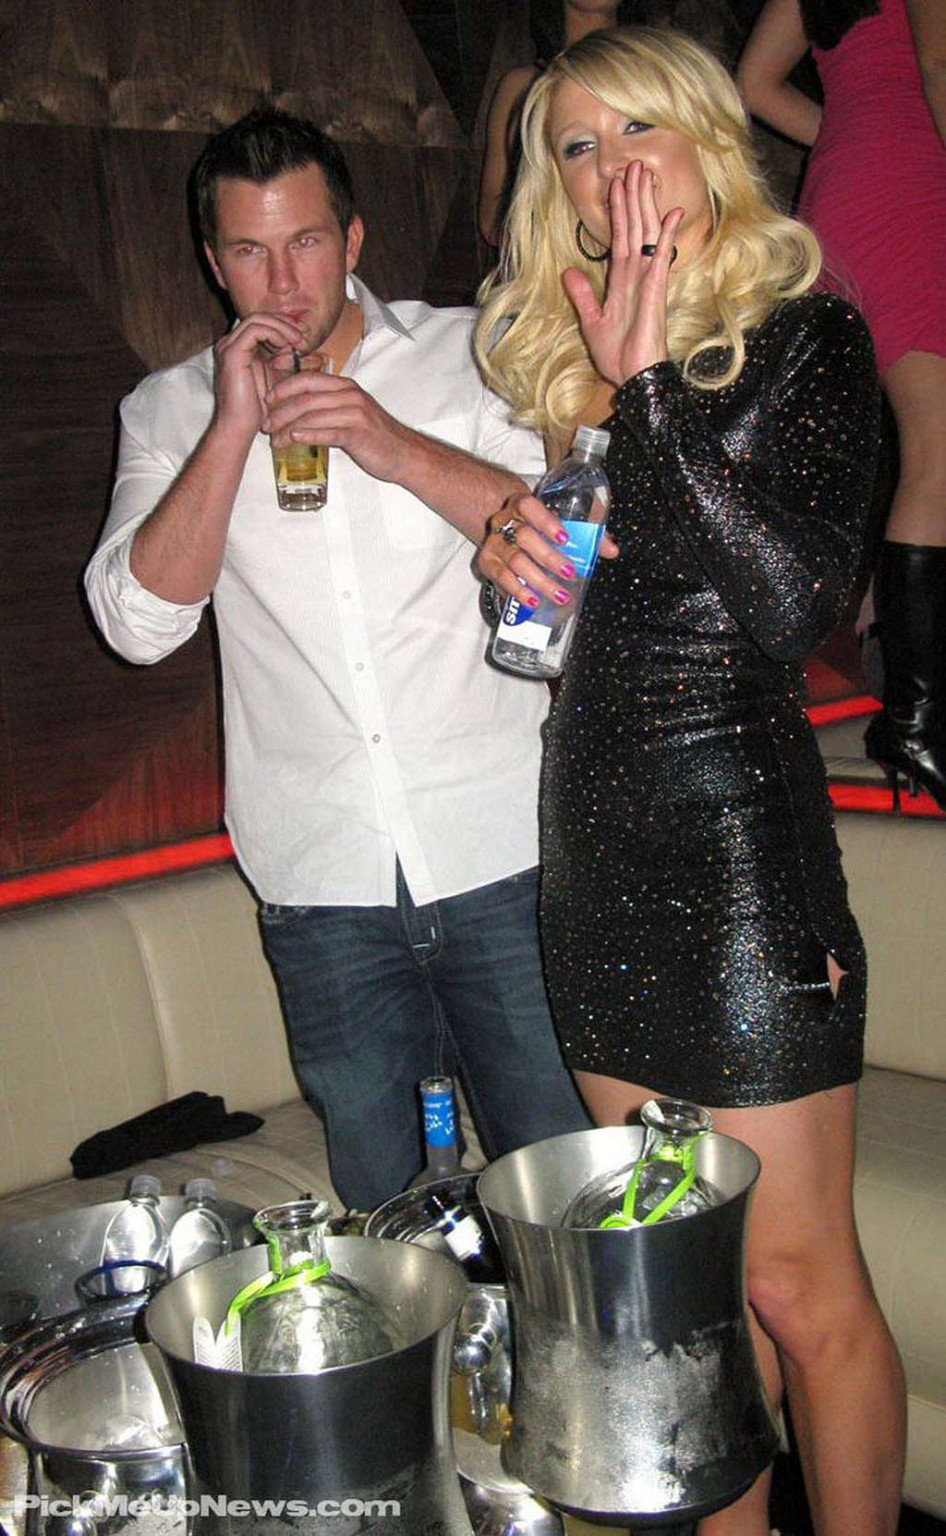 Paris Hilton enjoying on party and showing her sexy body #75359919